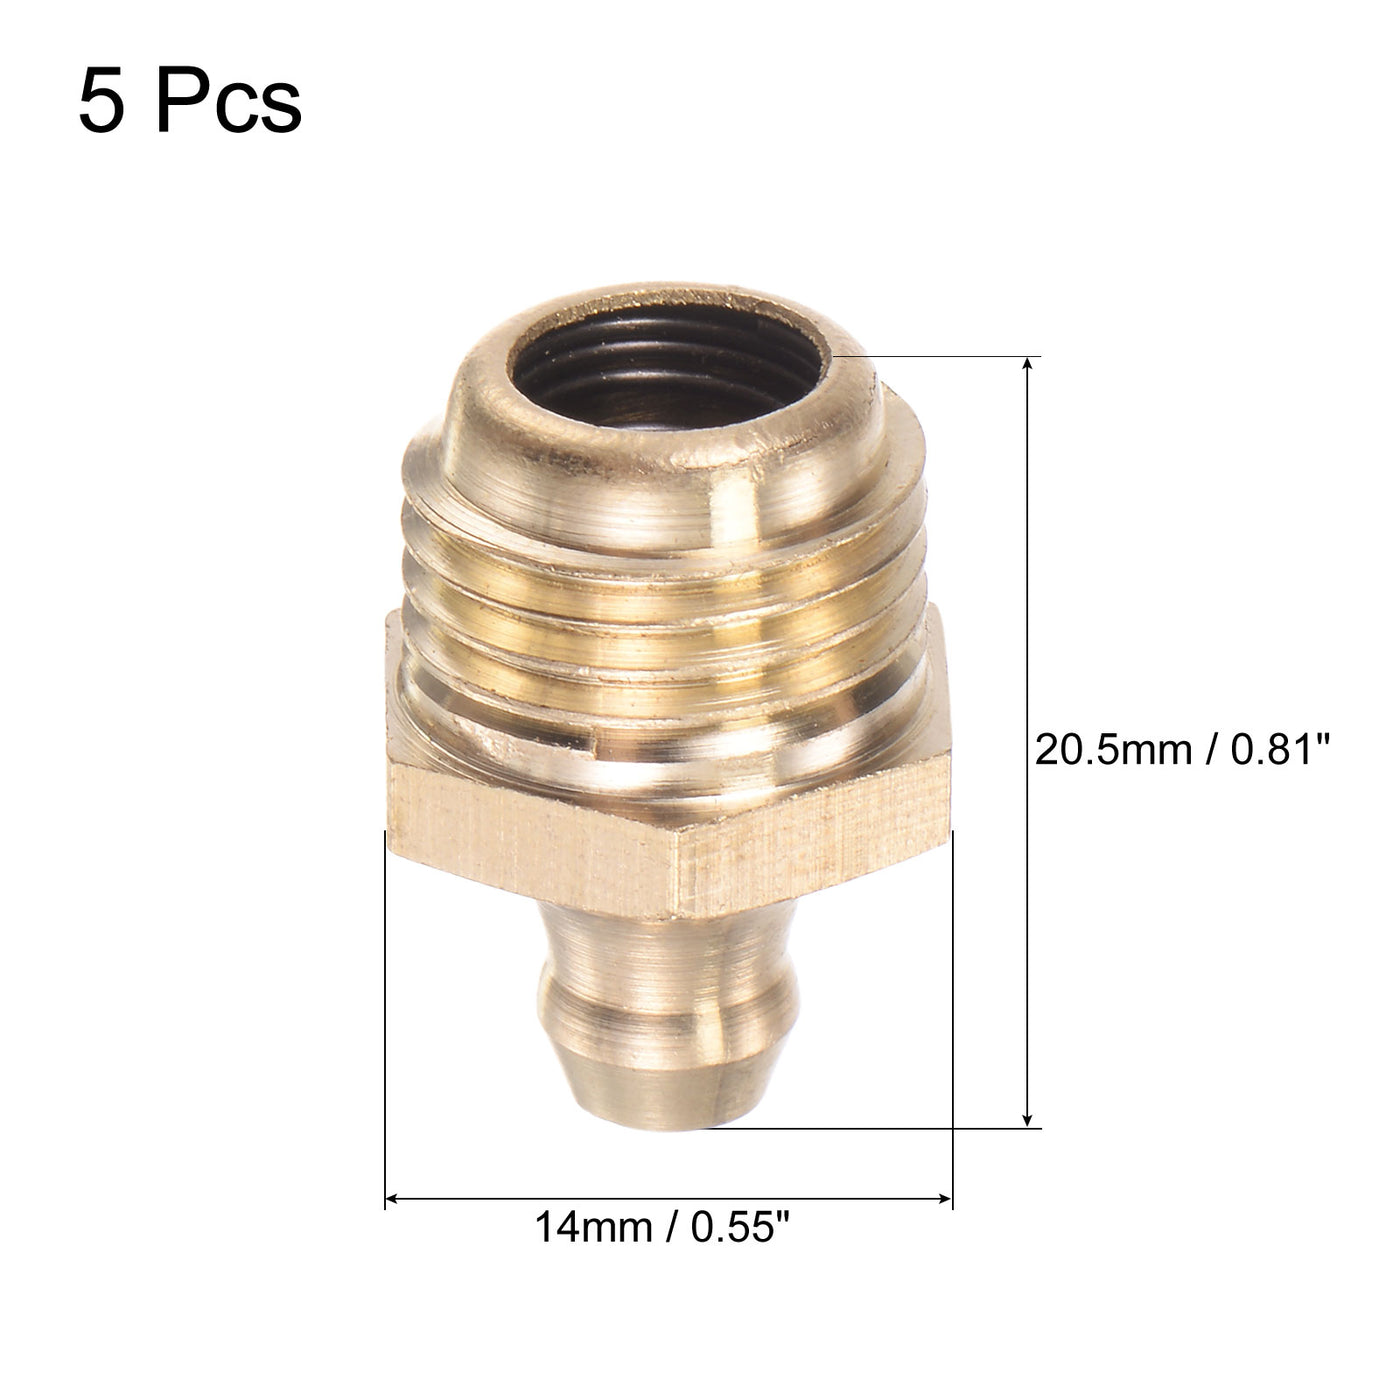 Uxcell Uxcell Brass Straight Hydraulic Grease Fitting G3/8 Thread 17mm Width, 5Pcs